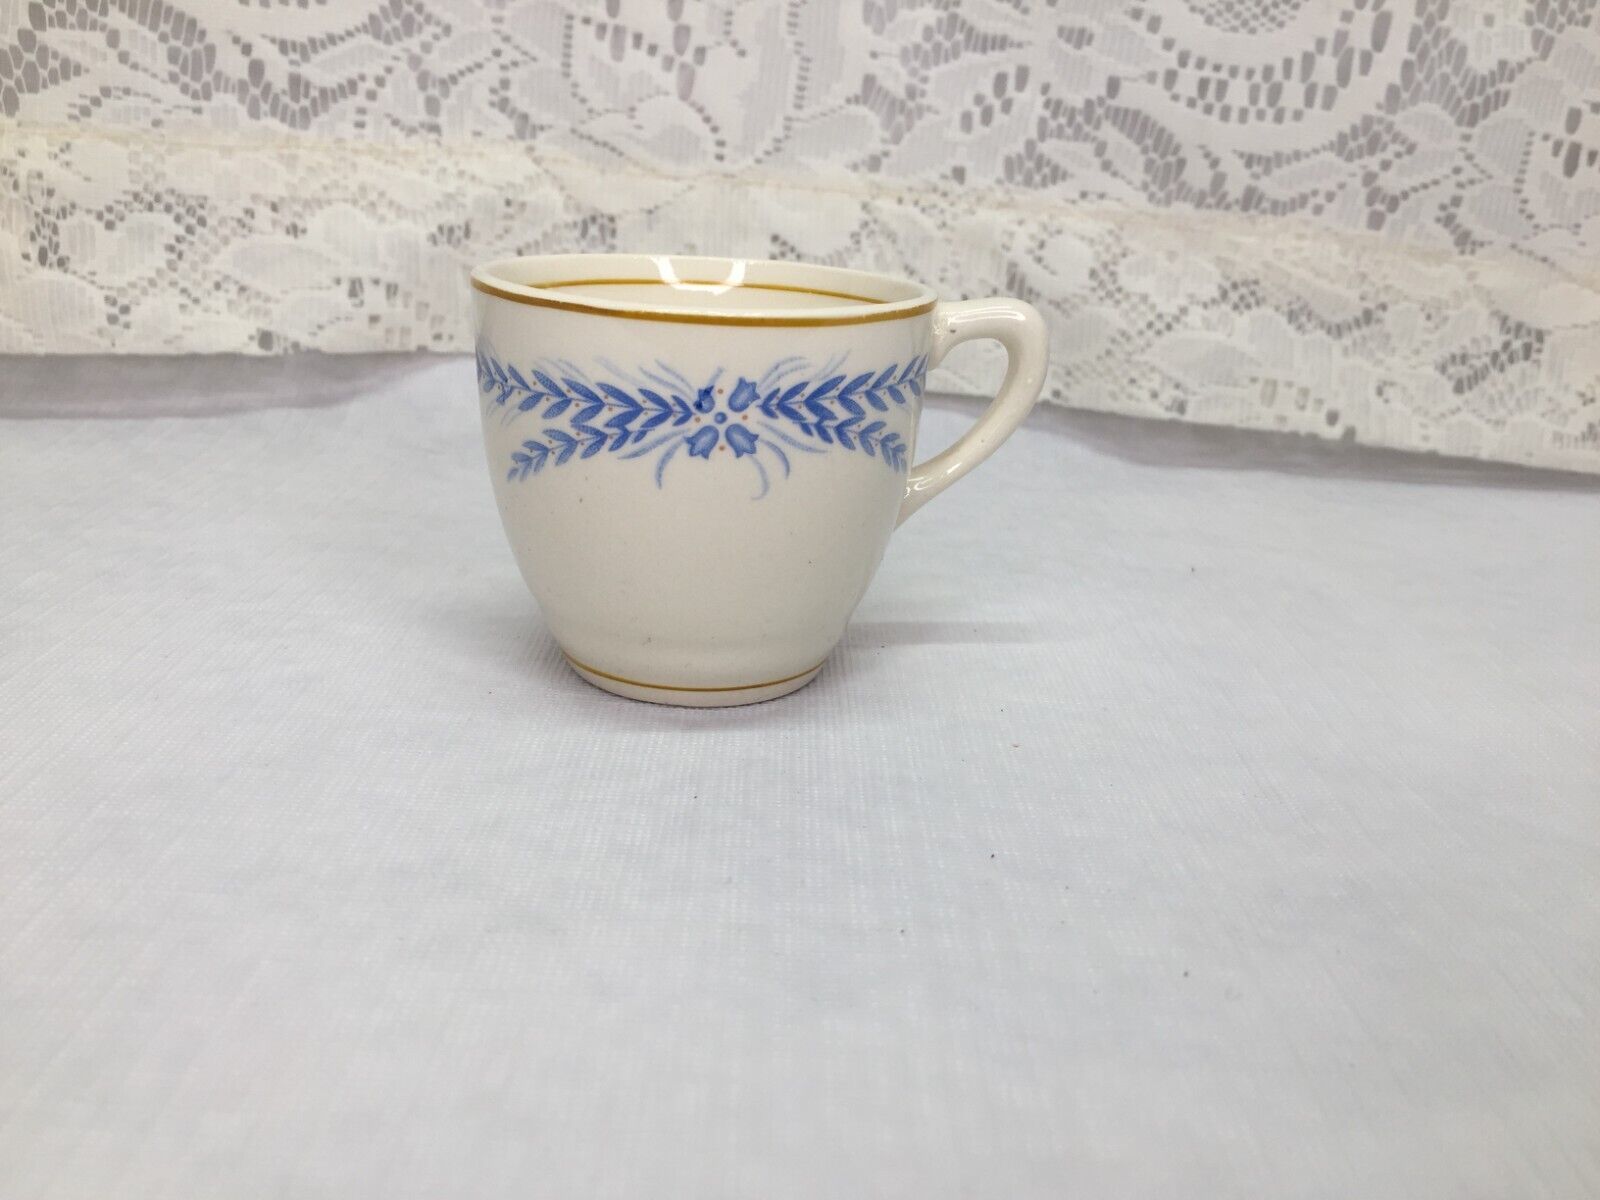 Primary image for Small Tea or Coffee Cup Blue Wheat Print w/Gold Tone Trim